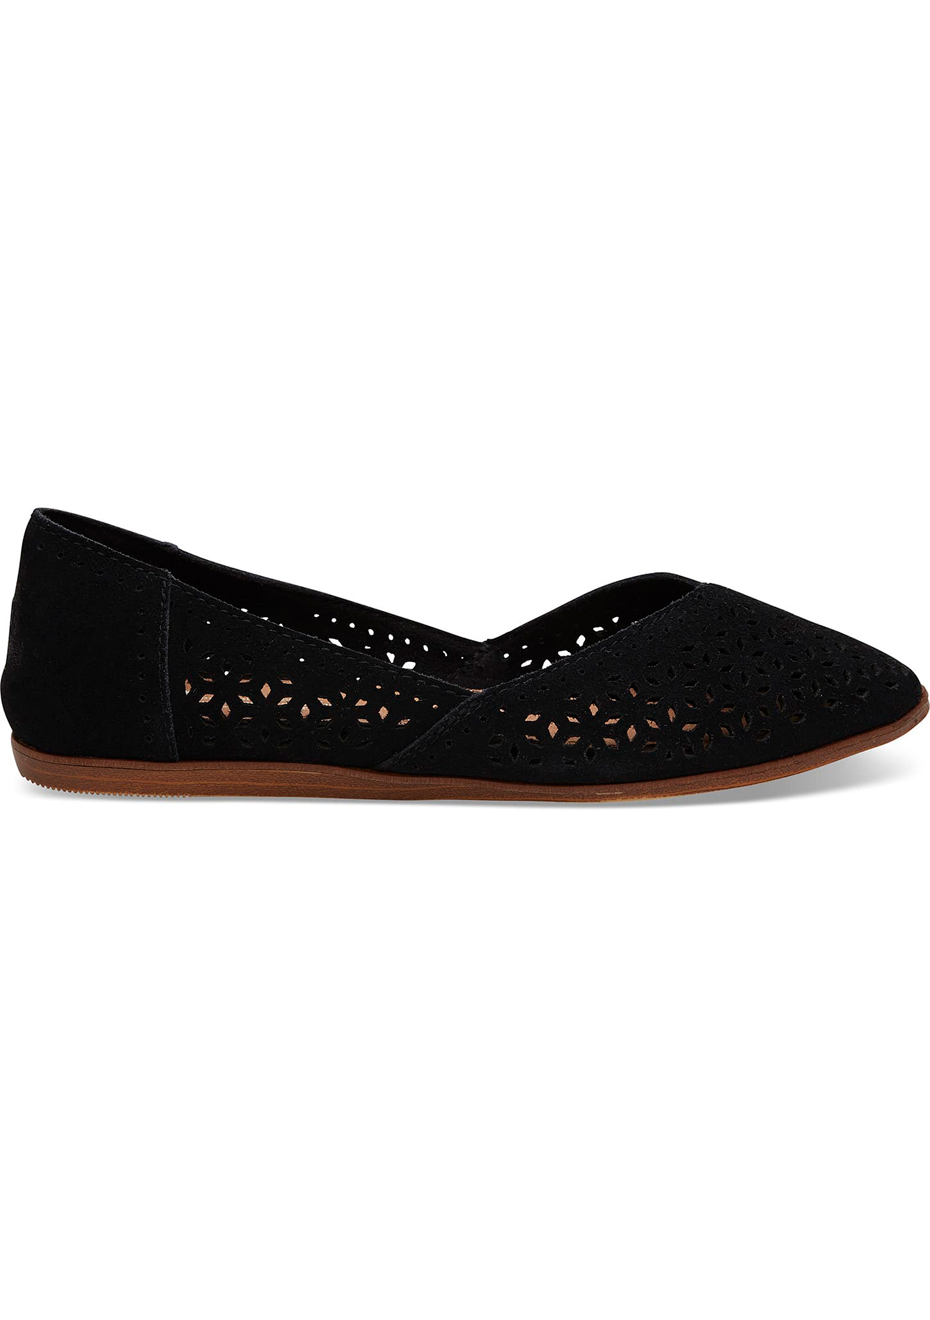 black perforated suede women's jutti flats